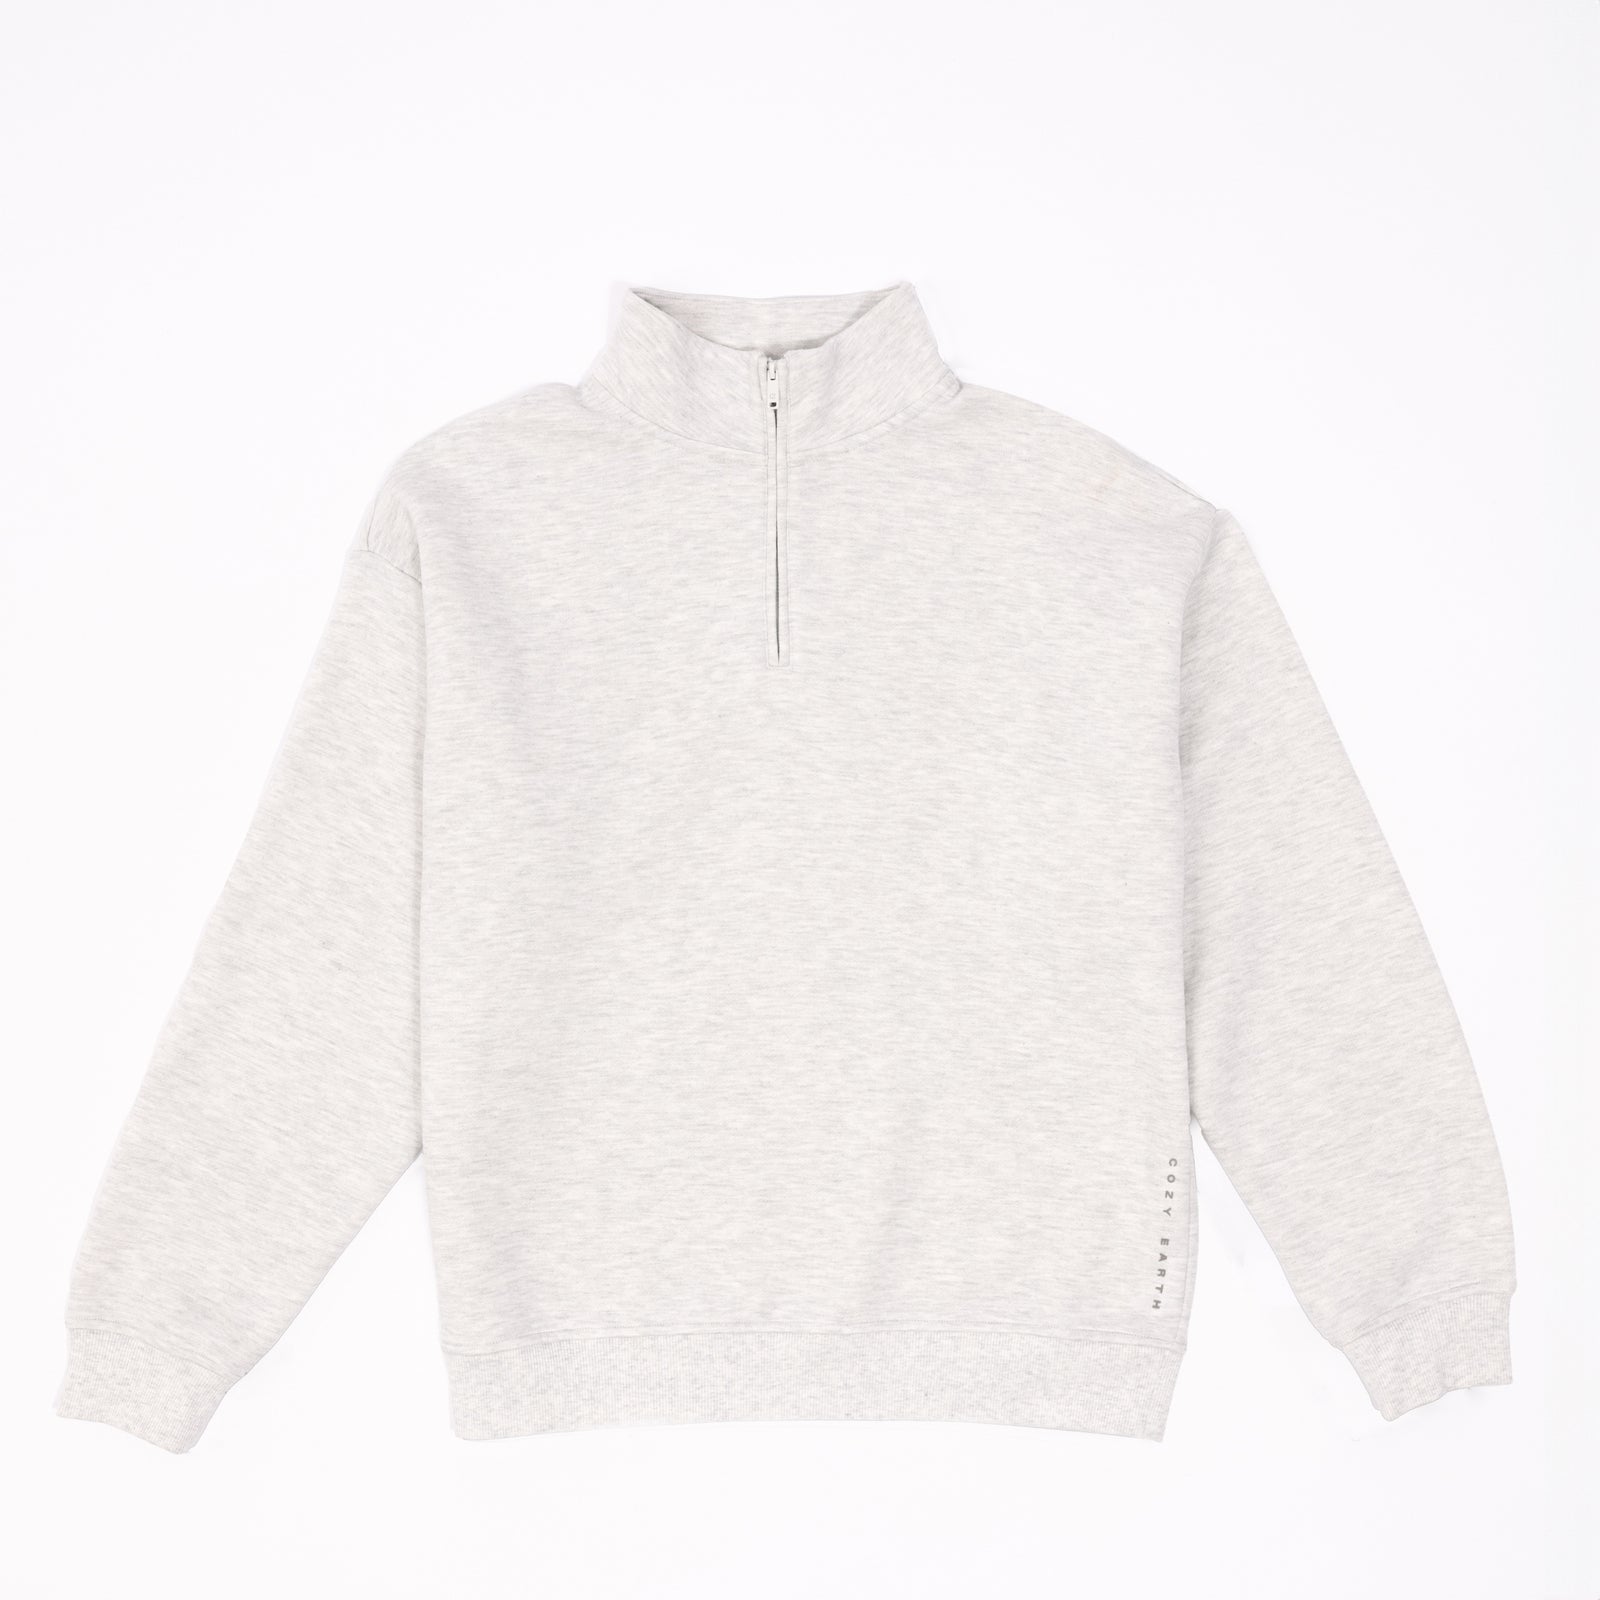 Heather Grey CityScape Quarter Zip laying flat on a white background. 